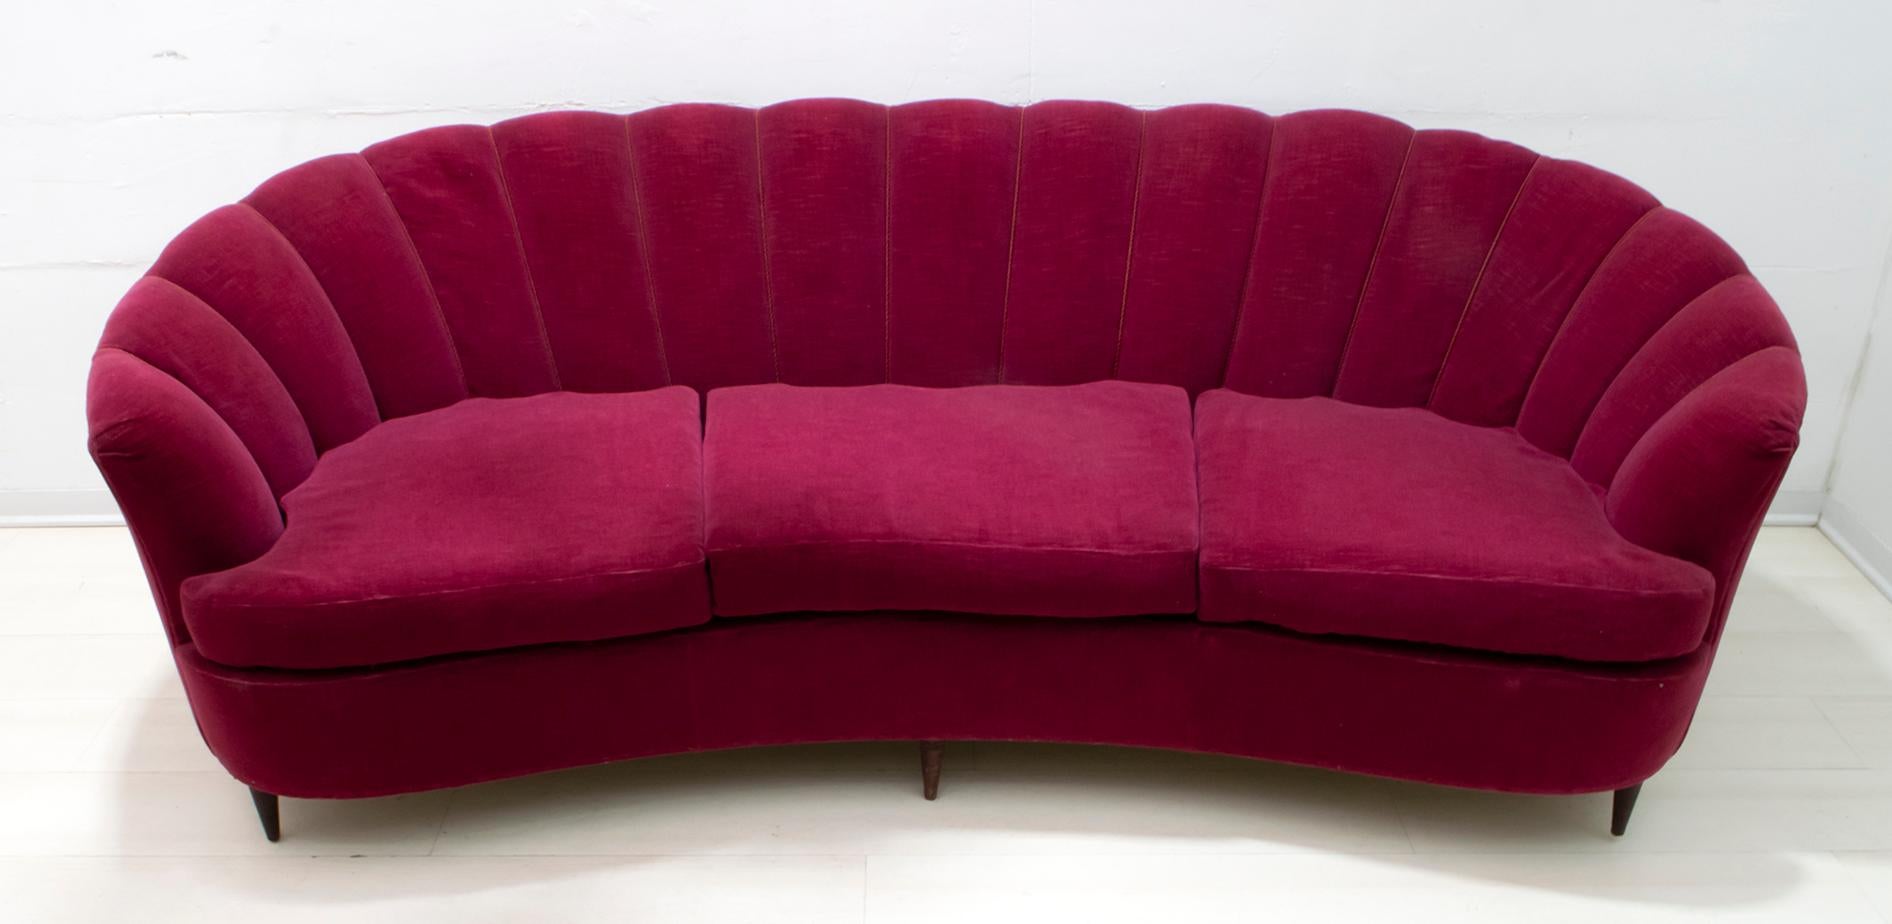 A rare sofa by Gio Ponti for Casa e, 1936.
Shell model covered in amarando red velvet, original of the time. The coating, as shown in the photo, is slightly worn. It is recommended to redo the coating.

With an additional cost we can provide for